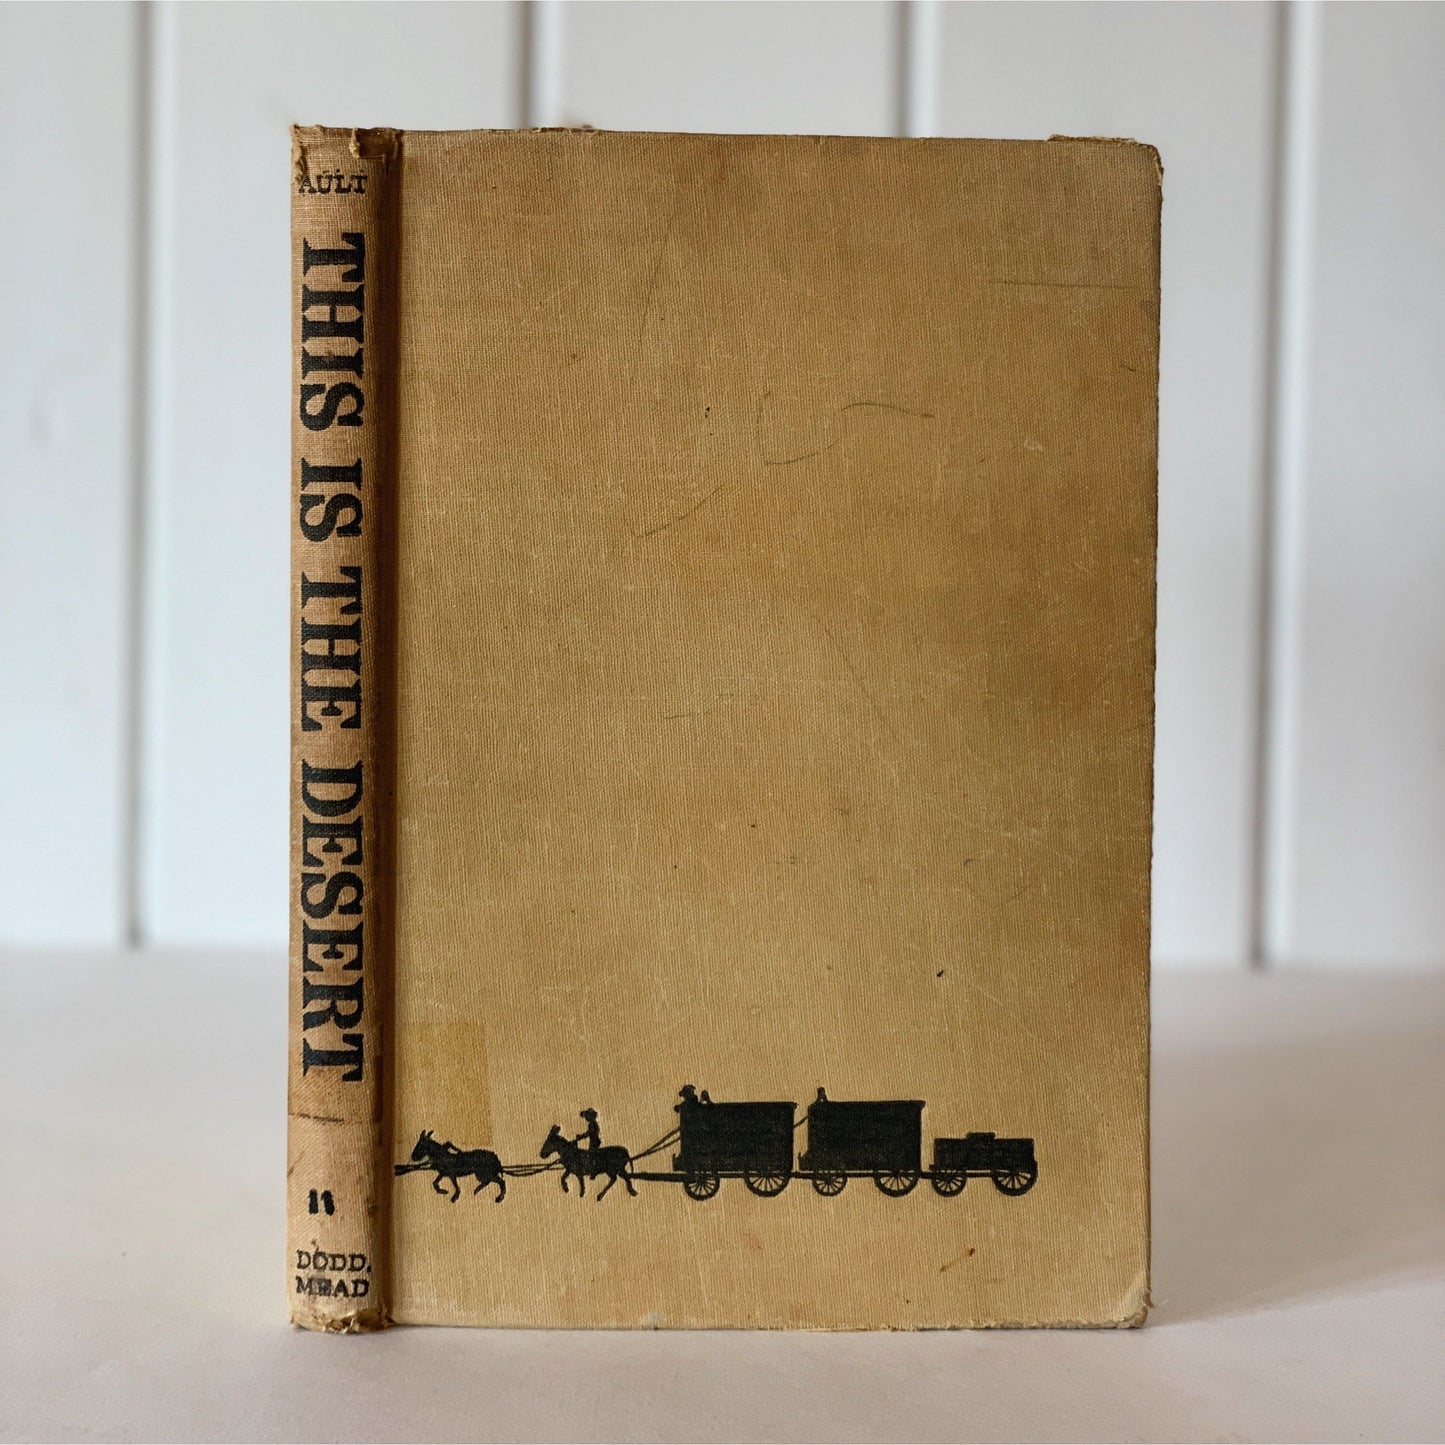 This is the Desert, Juvenile Nonfiction 1959 Hardcover